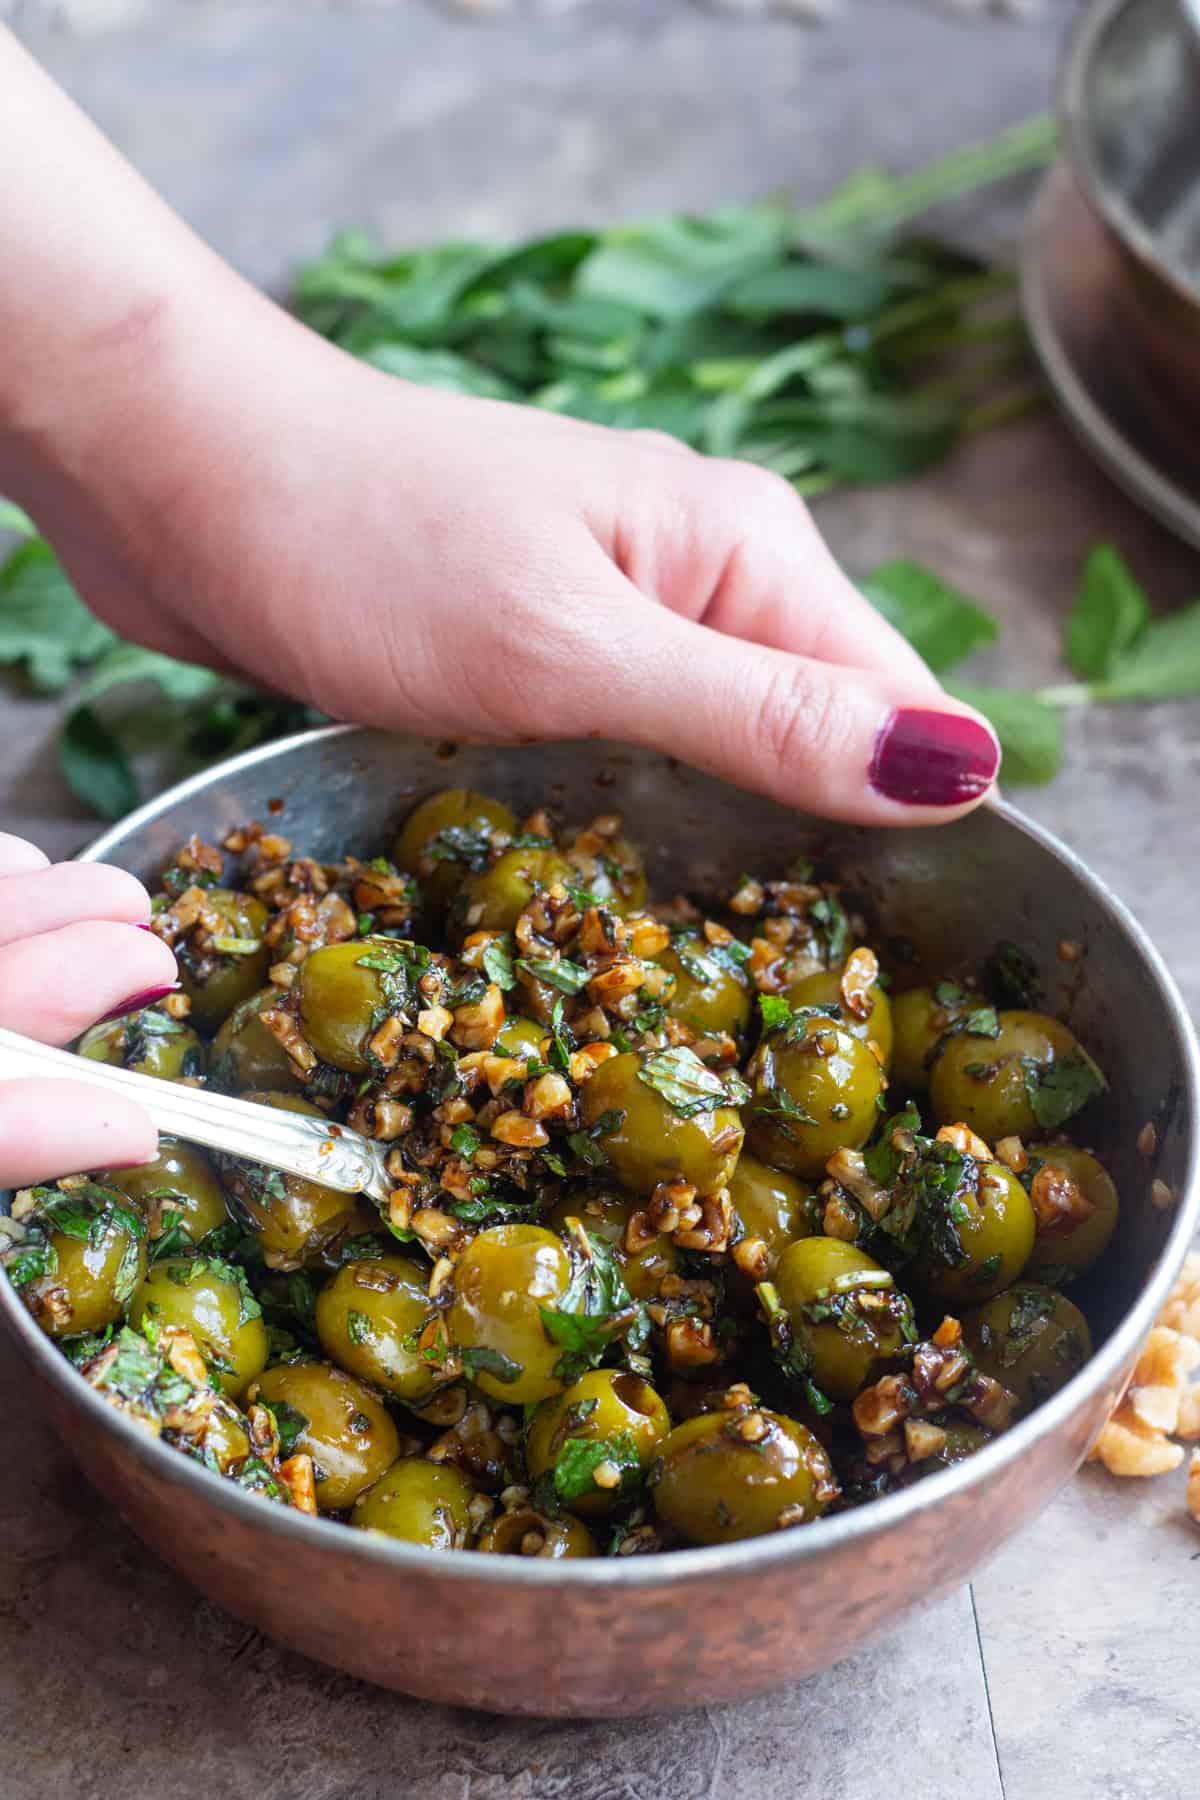 Serve marinated olives as an appetizer or side dish with different rice dishes.